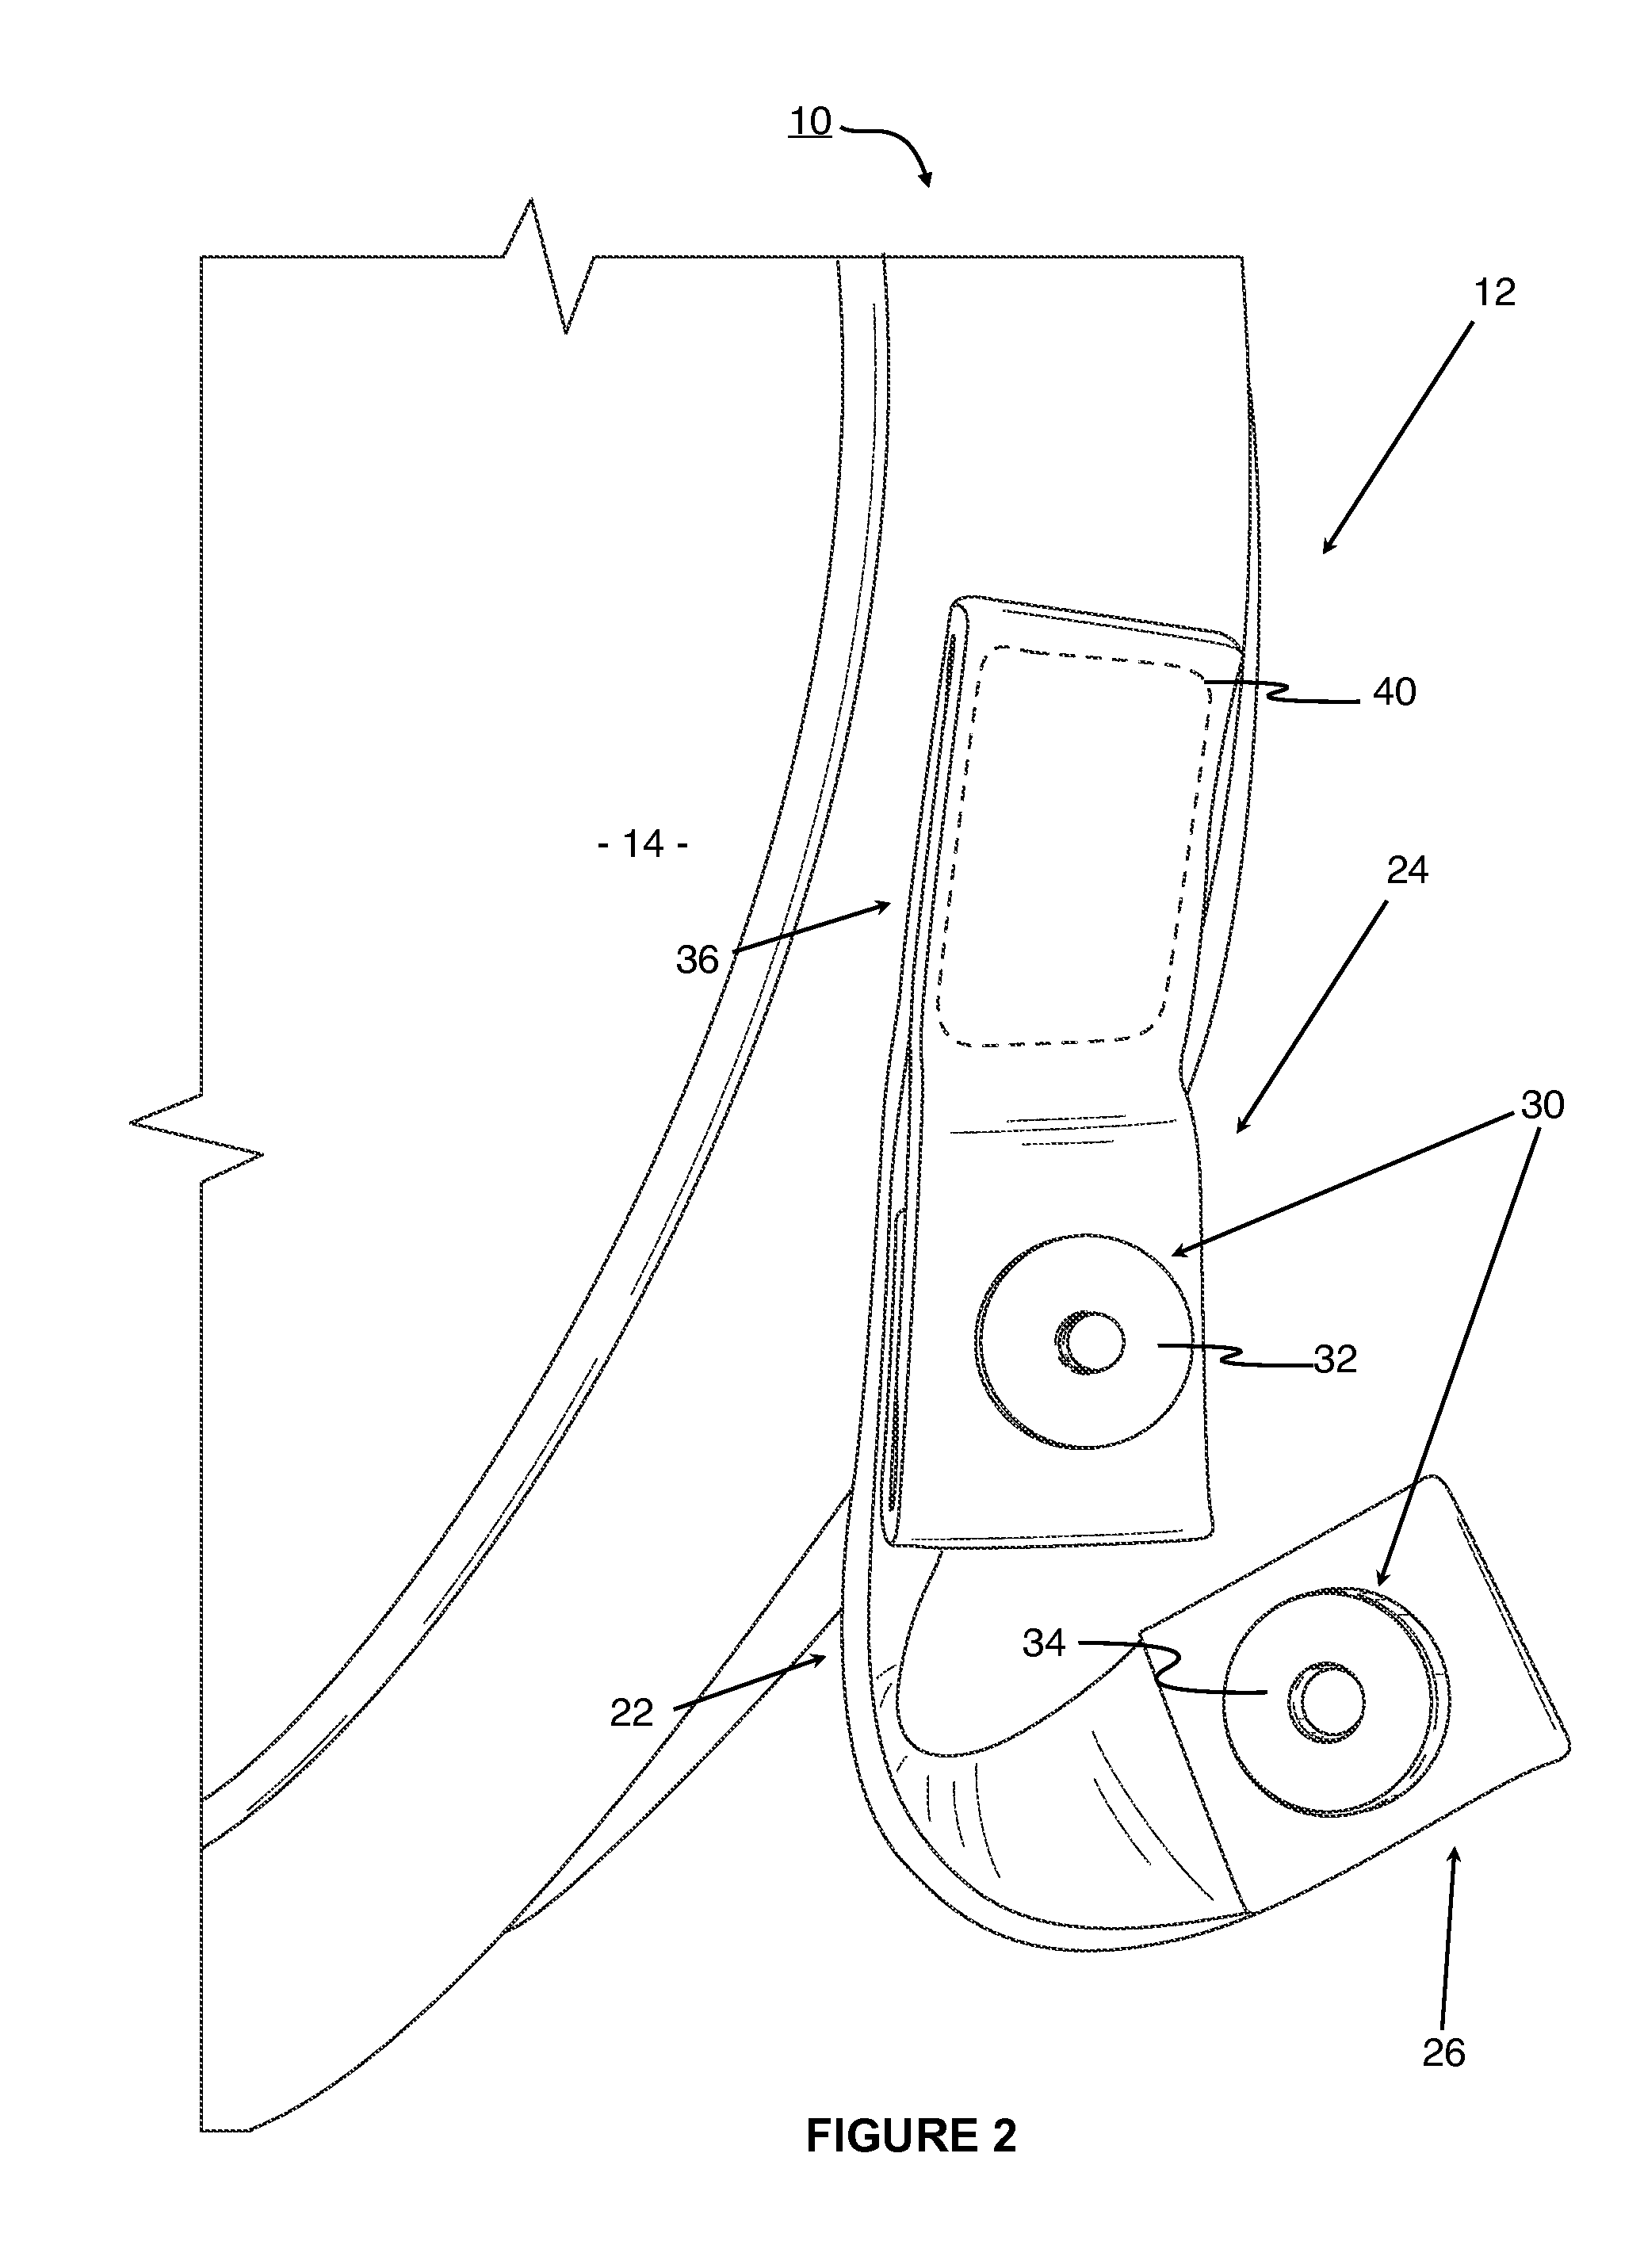 Assembly and Method for Attaching a Seat Cushion to a Chair